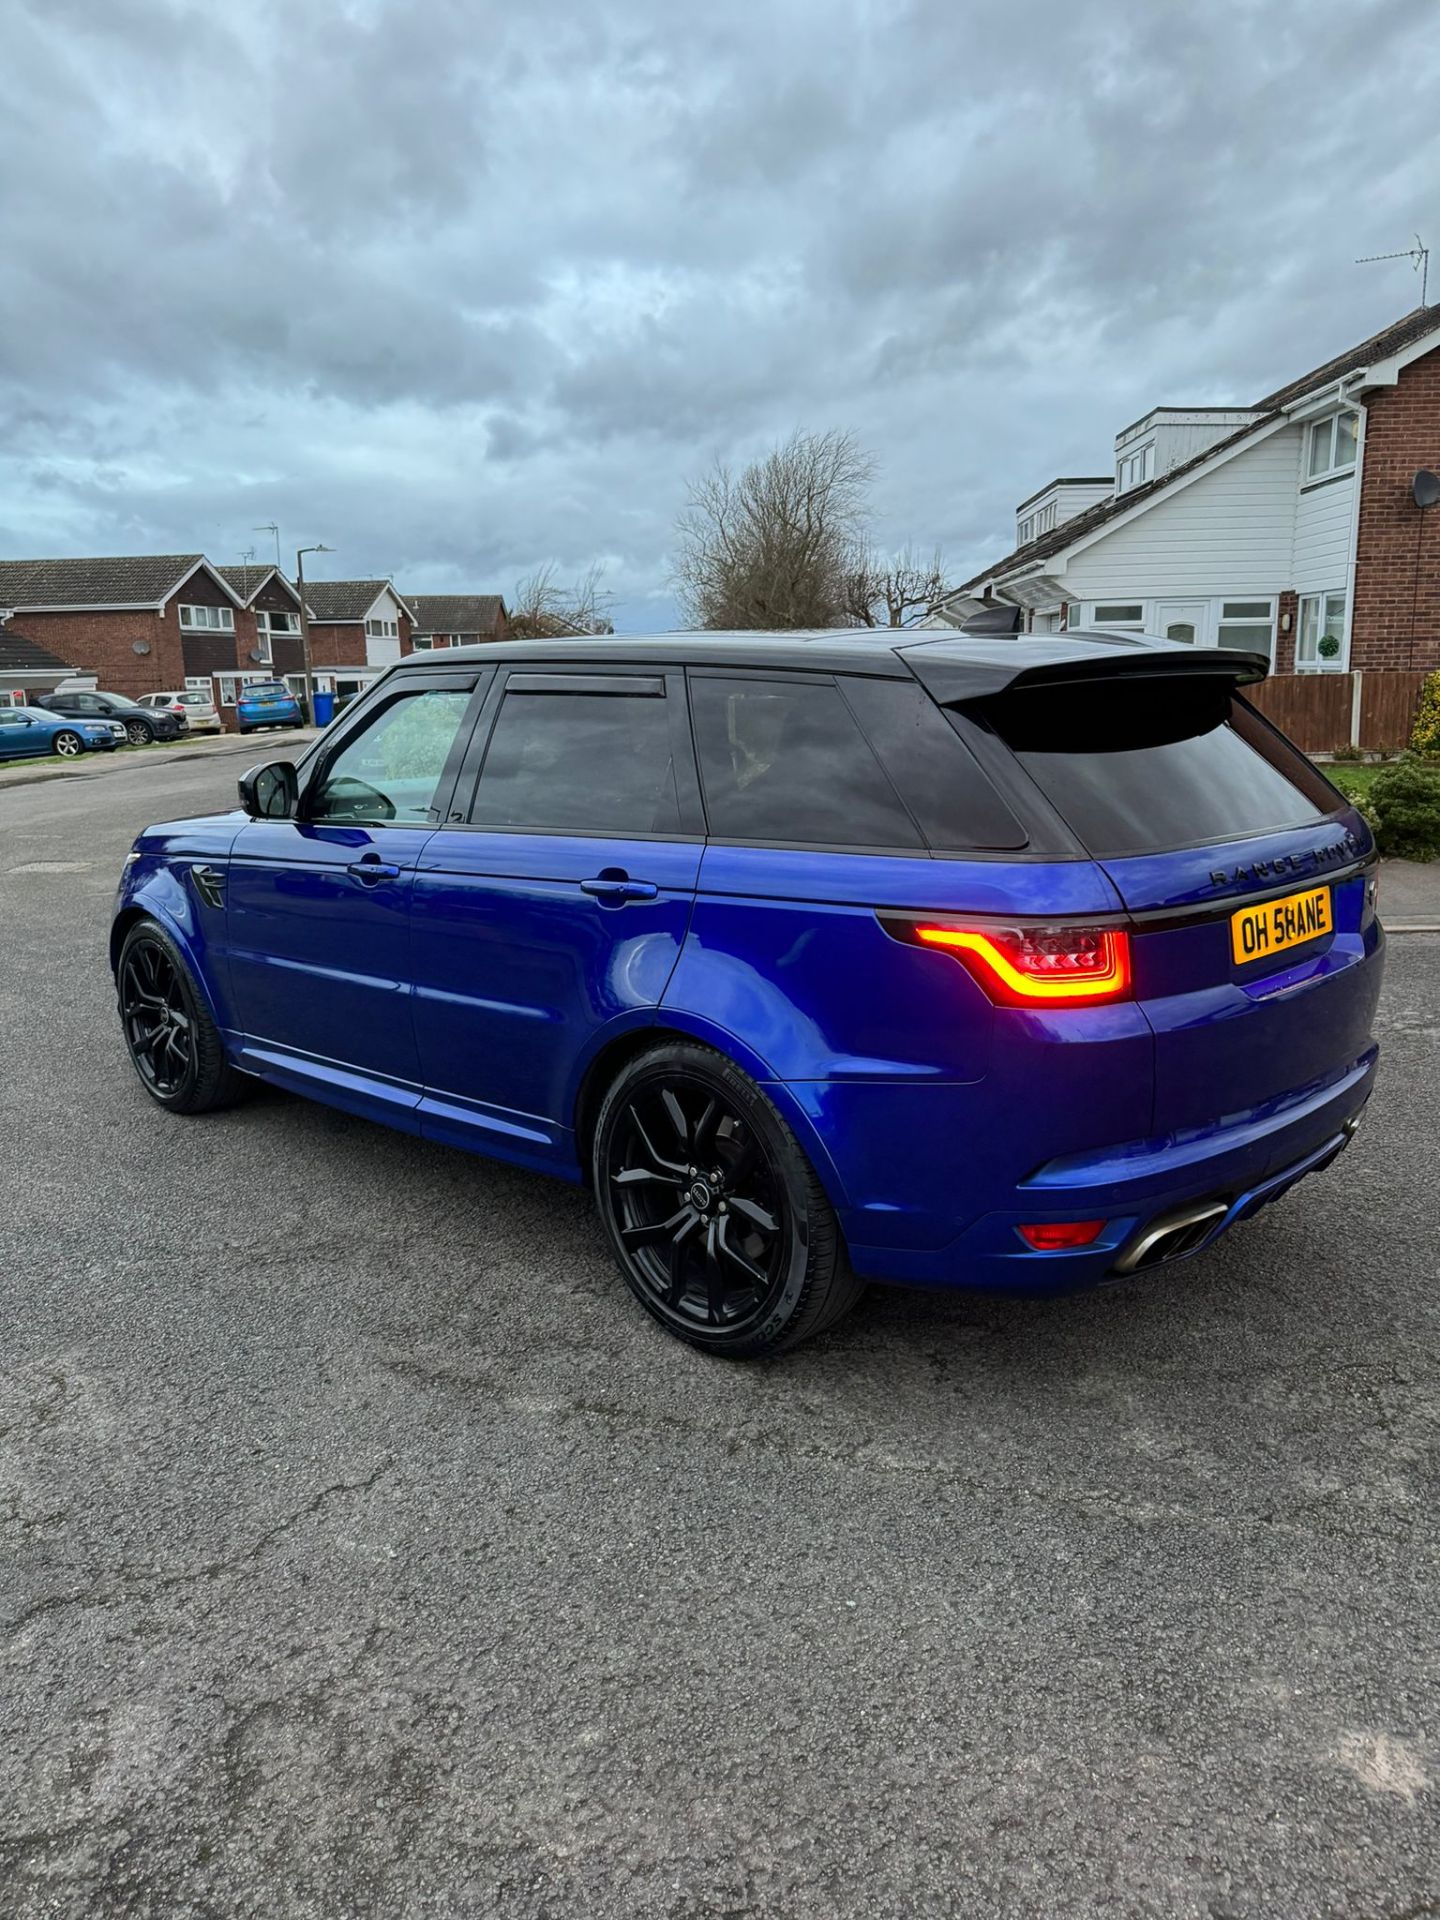 2018 18 RANGE ROVER SVR - 62K MILES WITH FULL LAND ROVER HISTORY - EXTREMELY CLEAN EXAMPLE. - Image 7 of 10